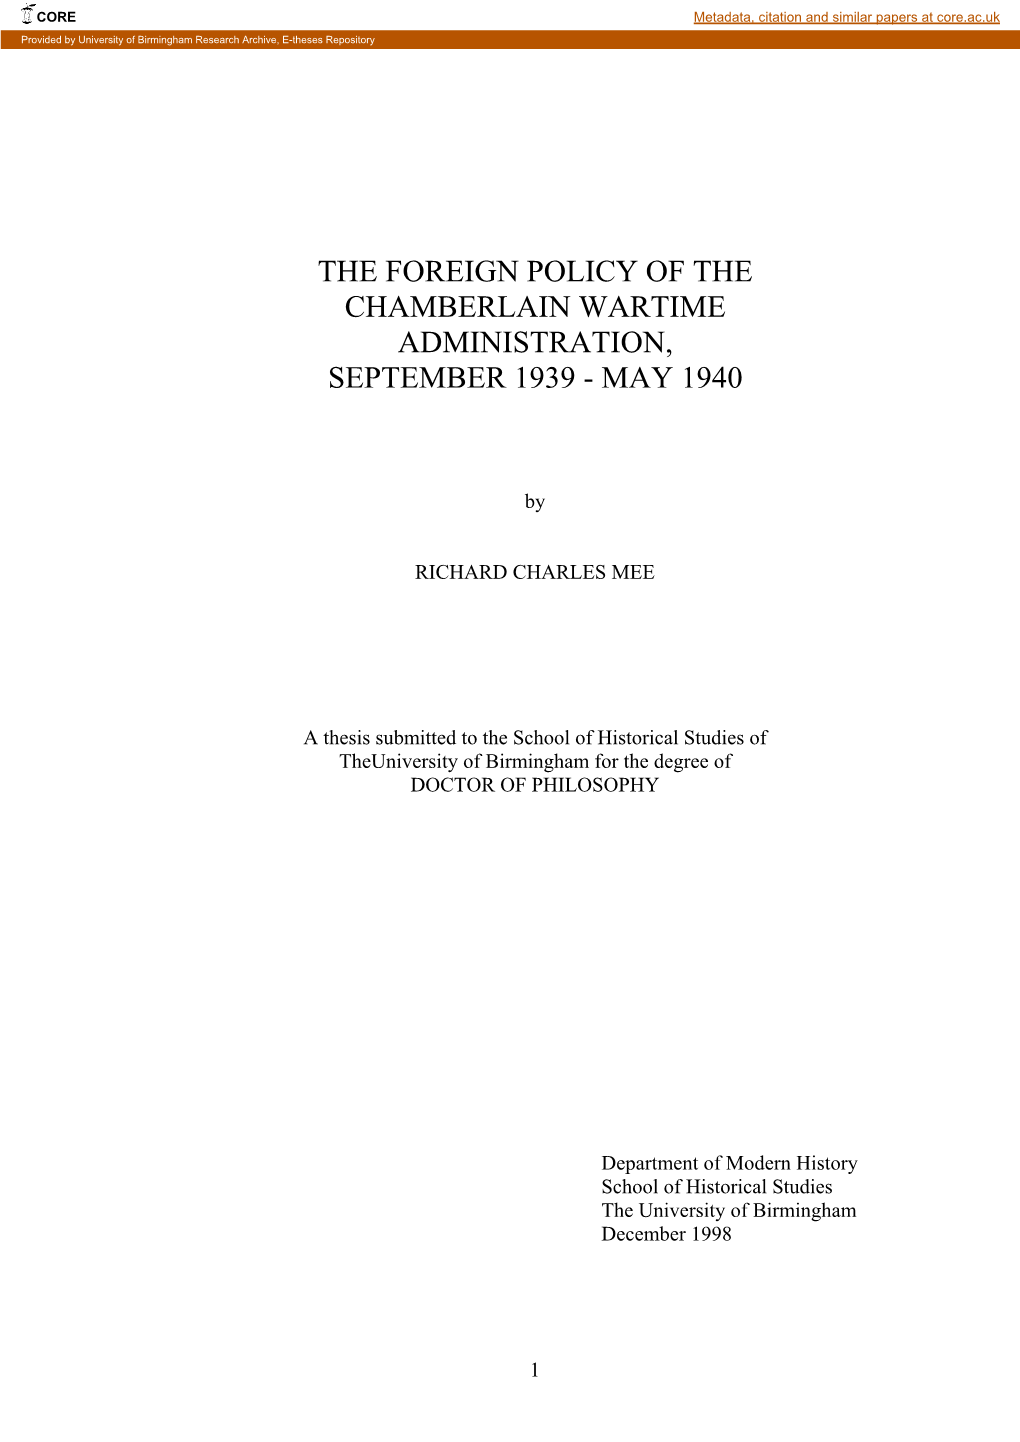 The Foreign Policy of the Chamberlain Wartime Administration, September 1939 - May 1940